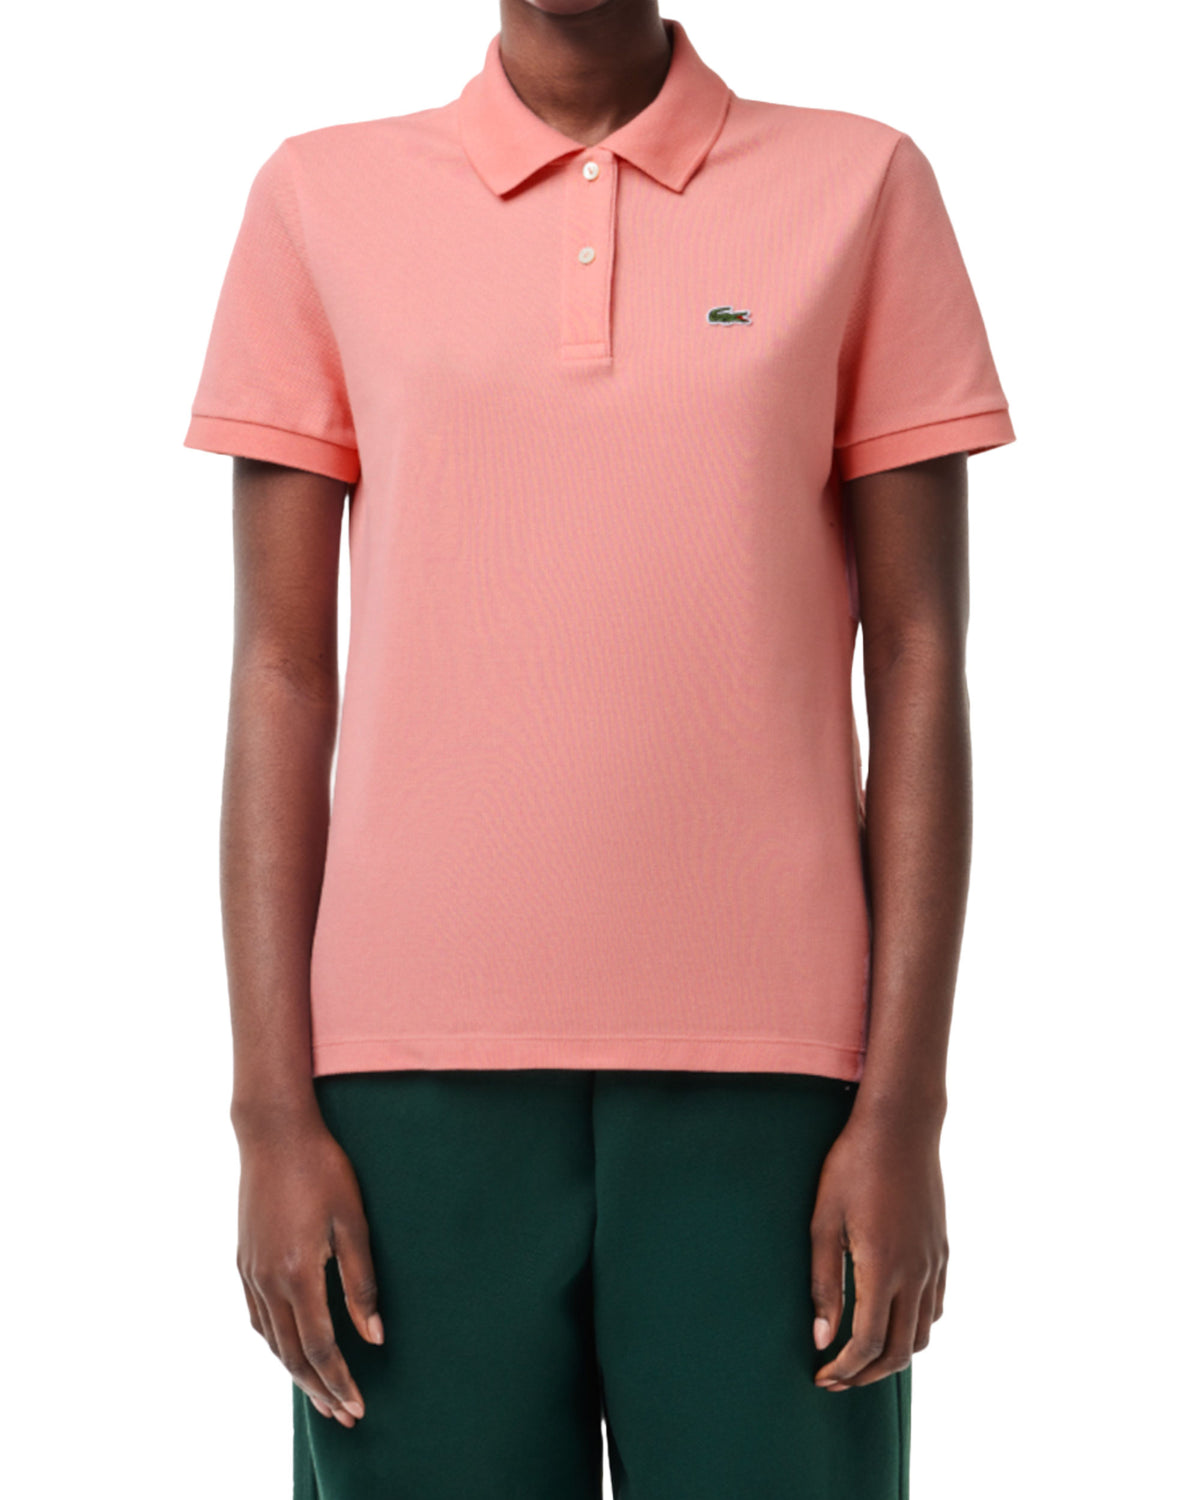 Woman's Polo Shirt Lacoste Pink